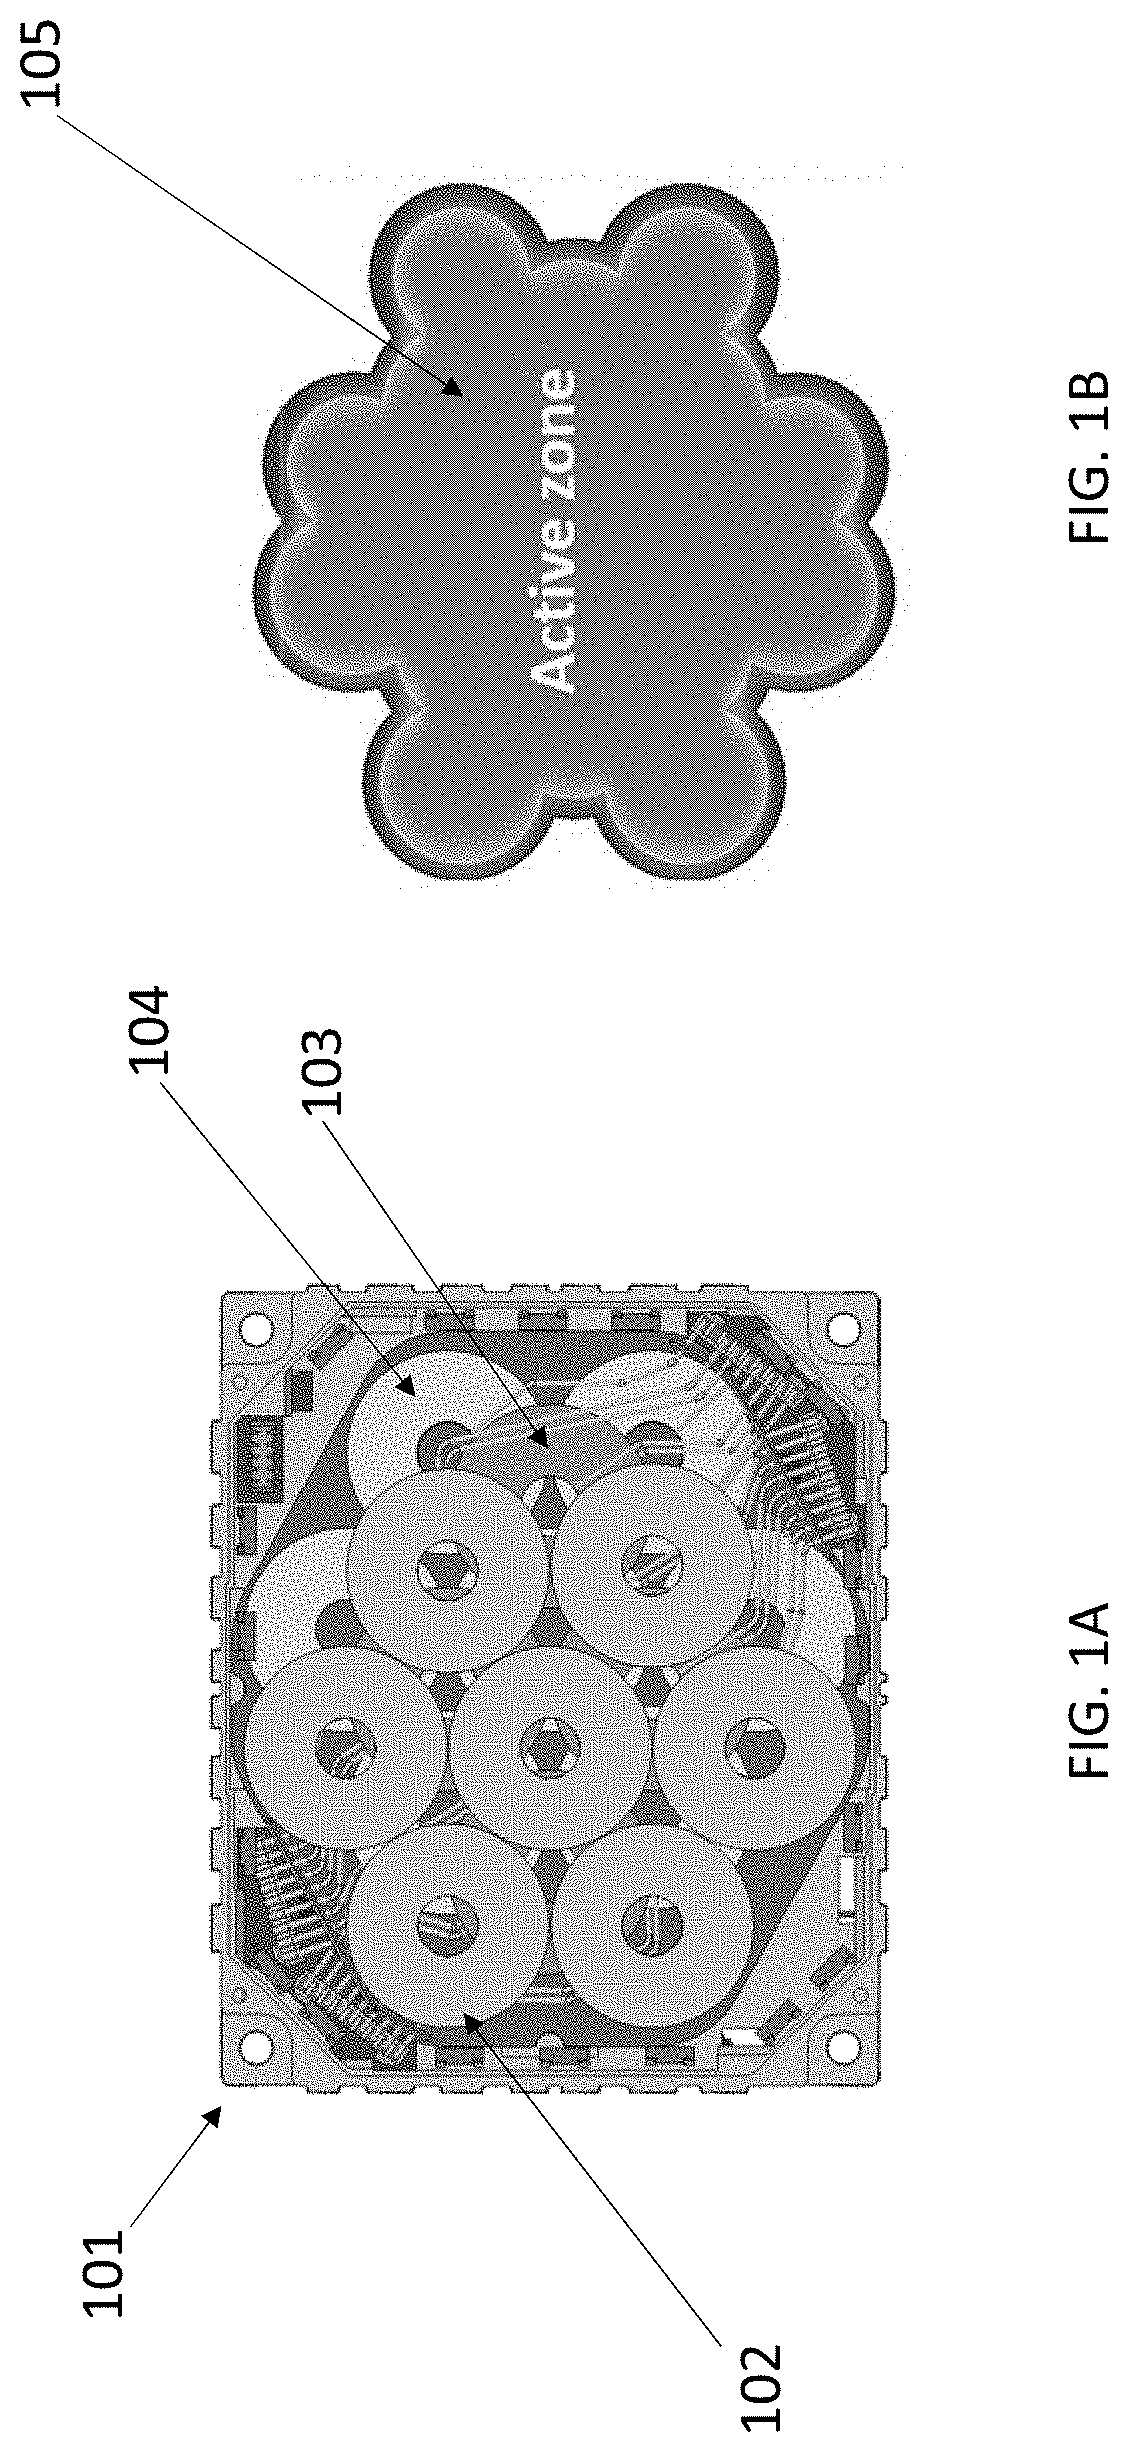 Structure of coils for a wireless charger